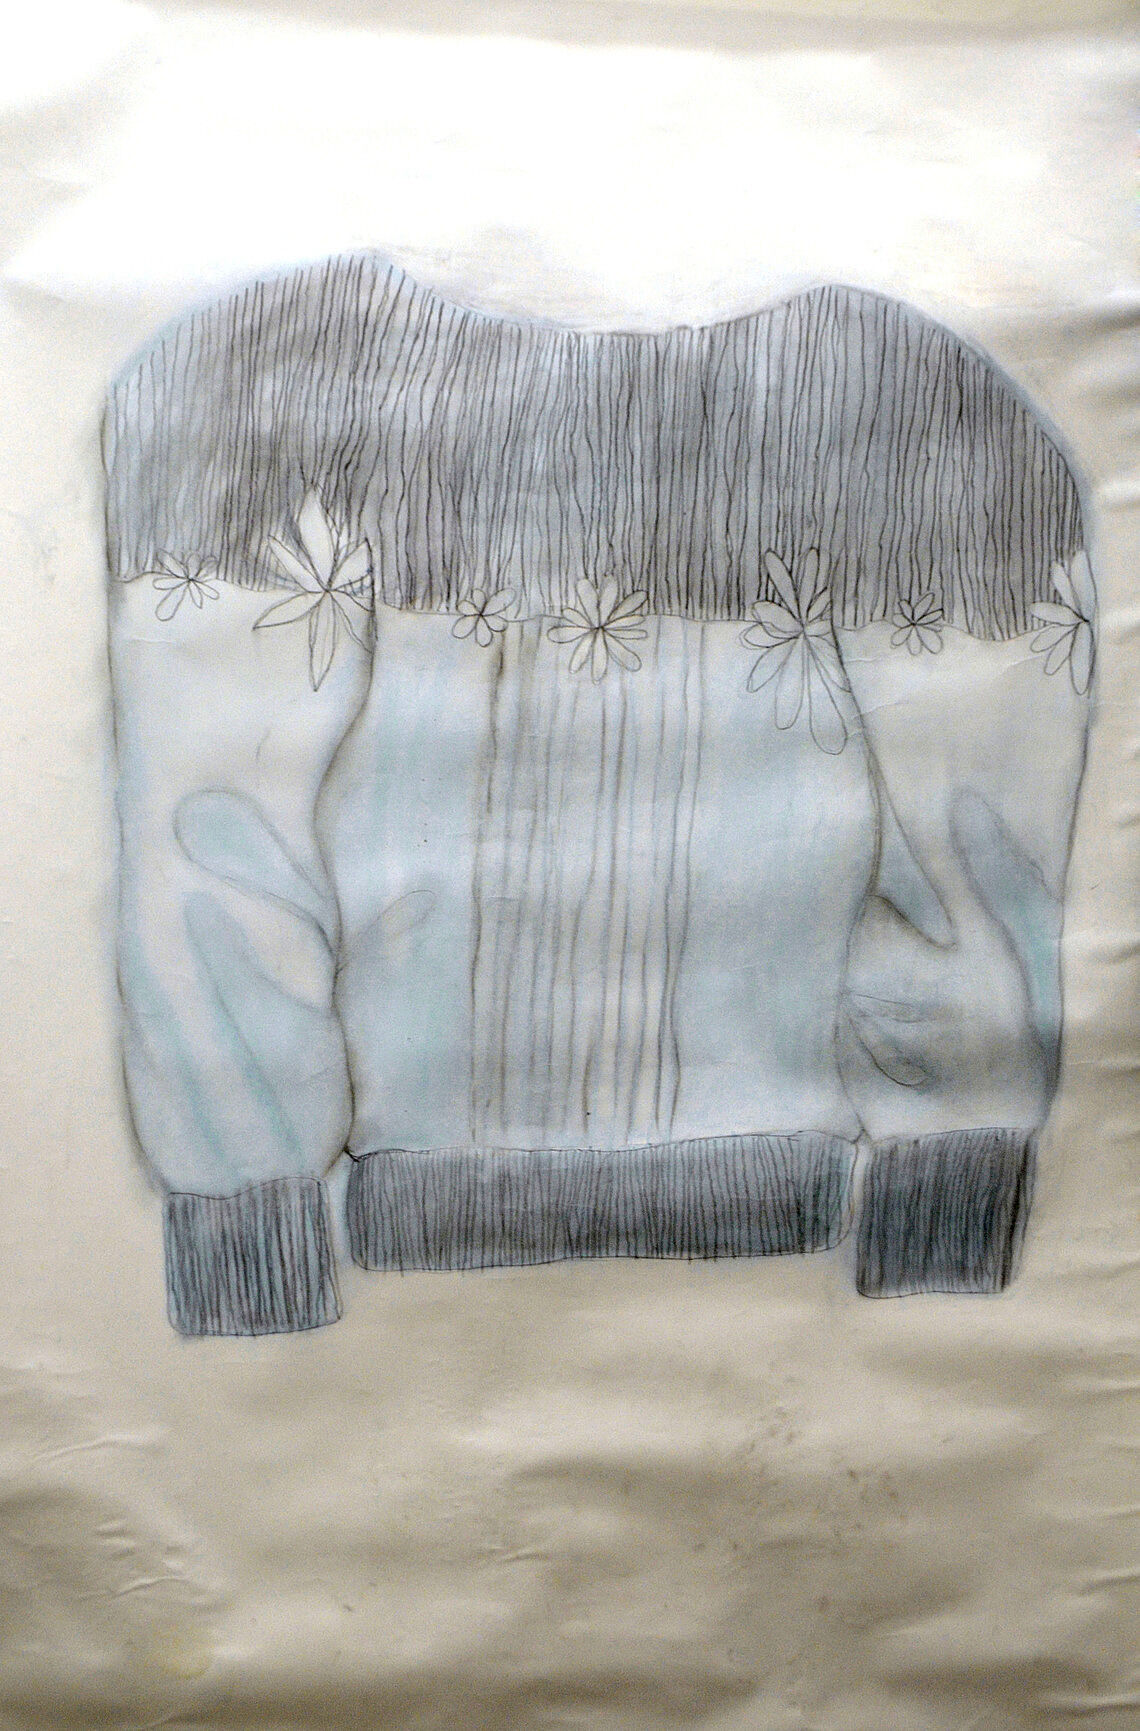 A drawing of a jacket with blue, white, and black shades.